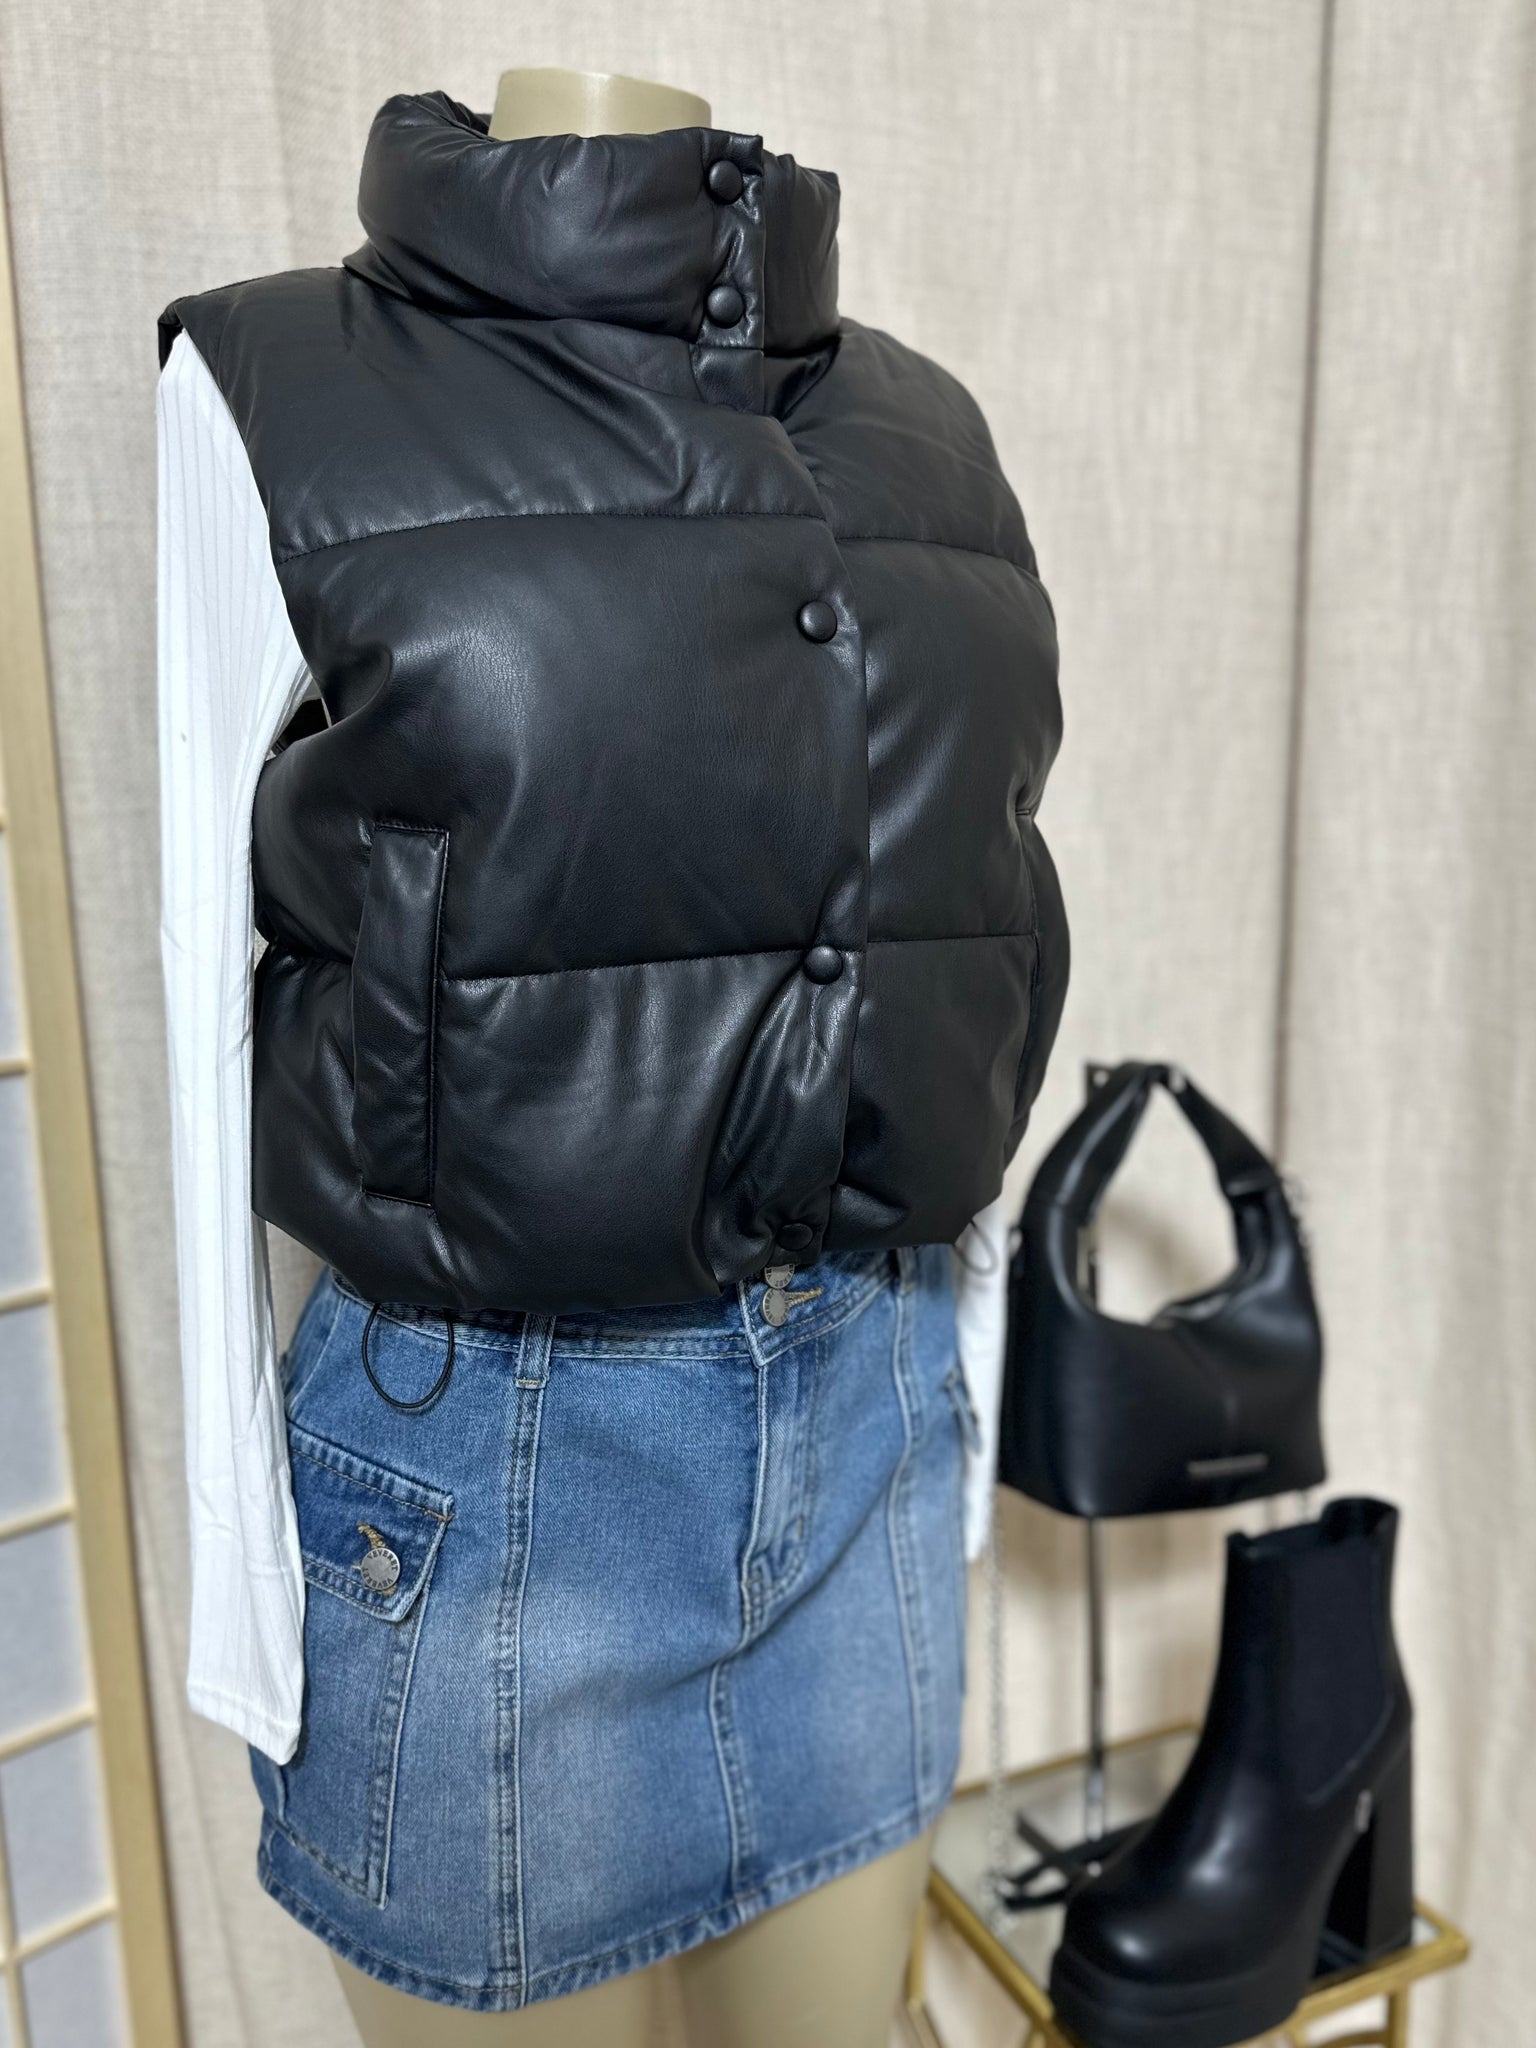 The “Trendsetting” Faux Leather Puffer Vest